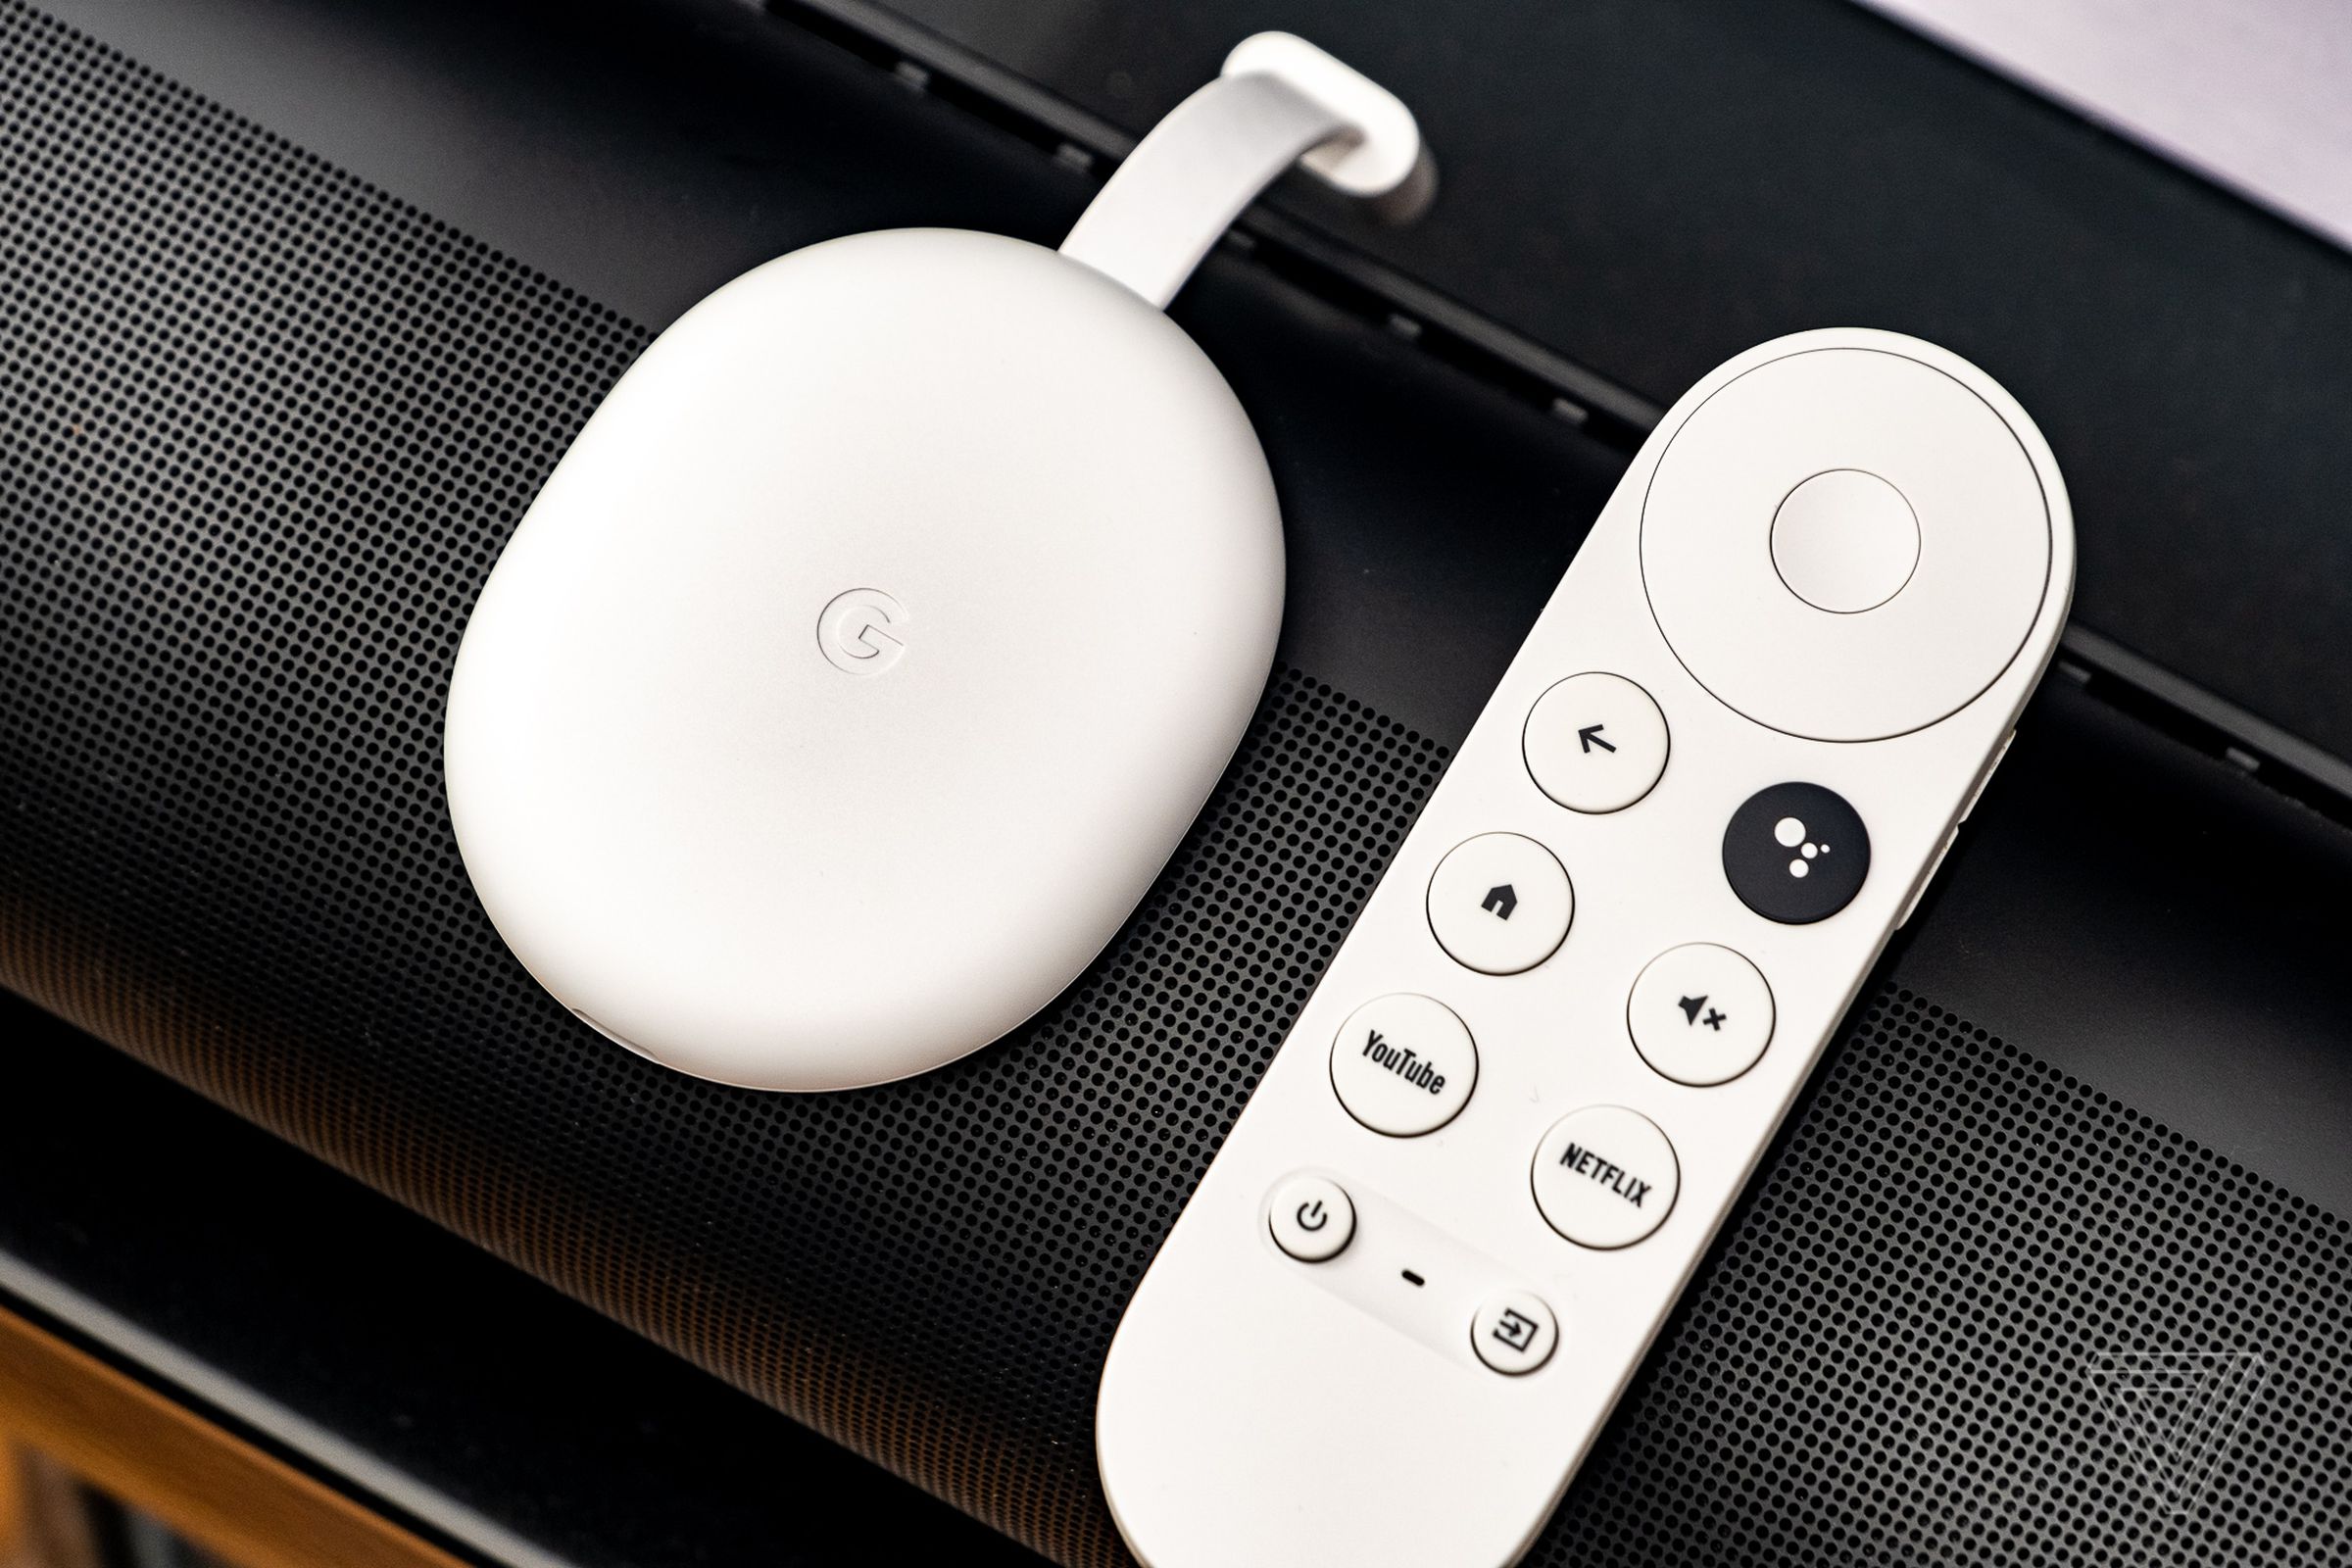 A variety of changes are coming to both the Chromecast with Google TV and third-party devices.